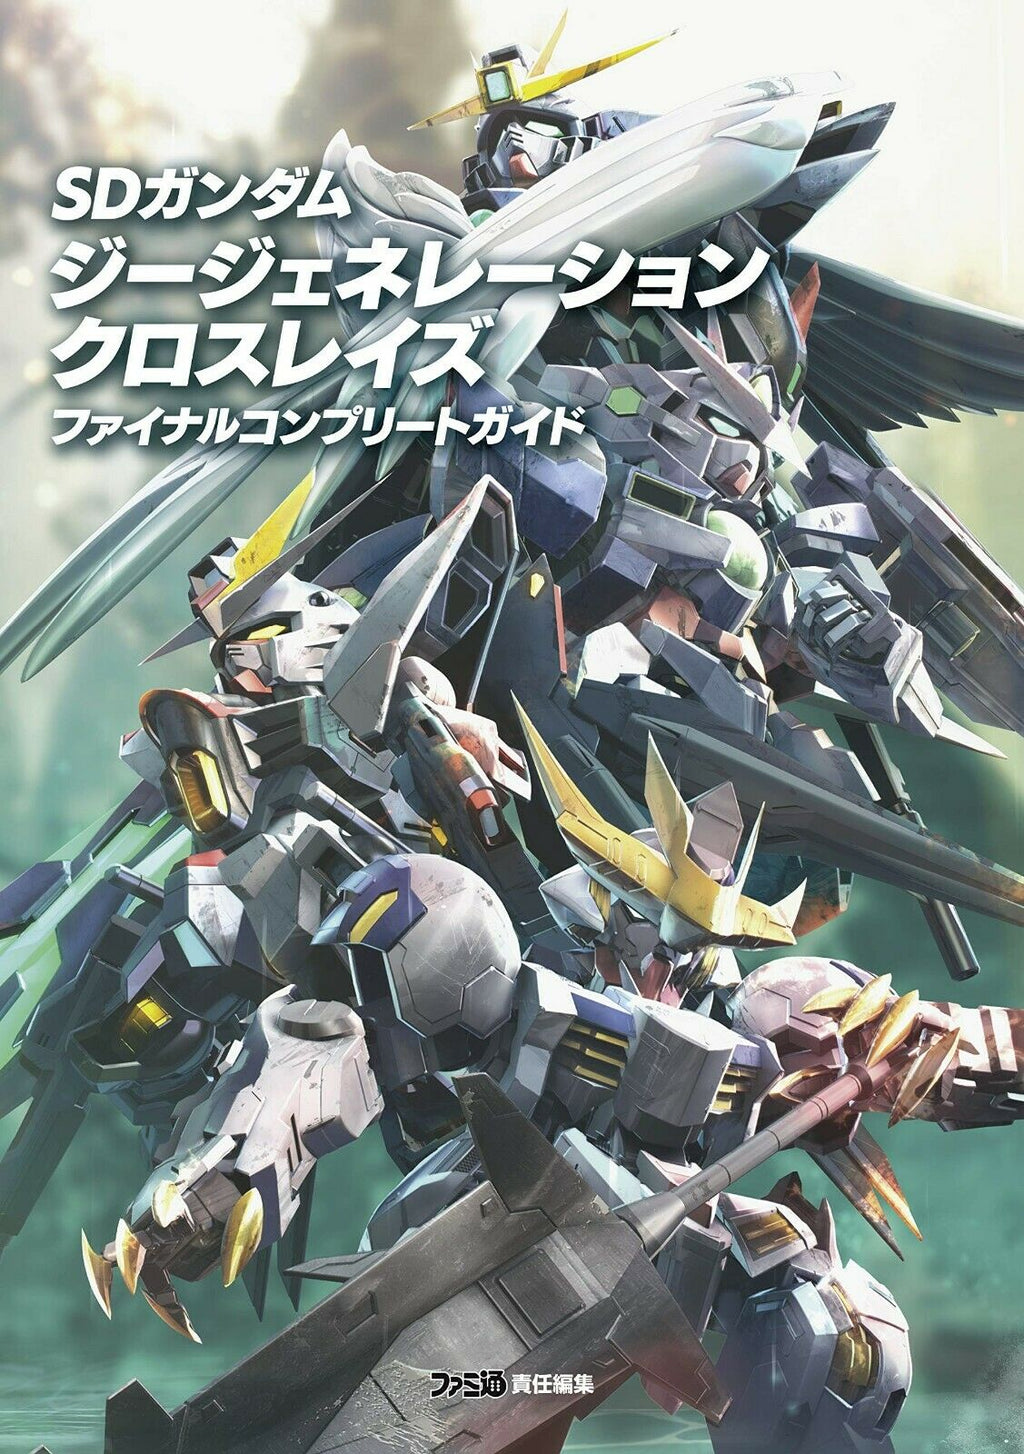 NEW SD Gundam G Generation Cross Rays FINAL COMPLETE GUIDE BOOK | JAPAN Game